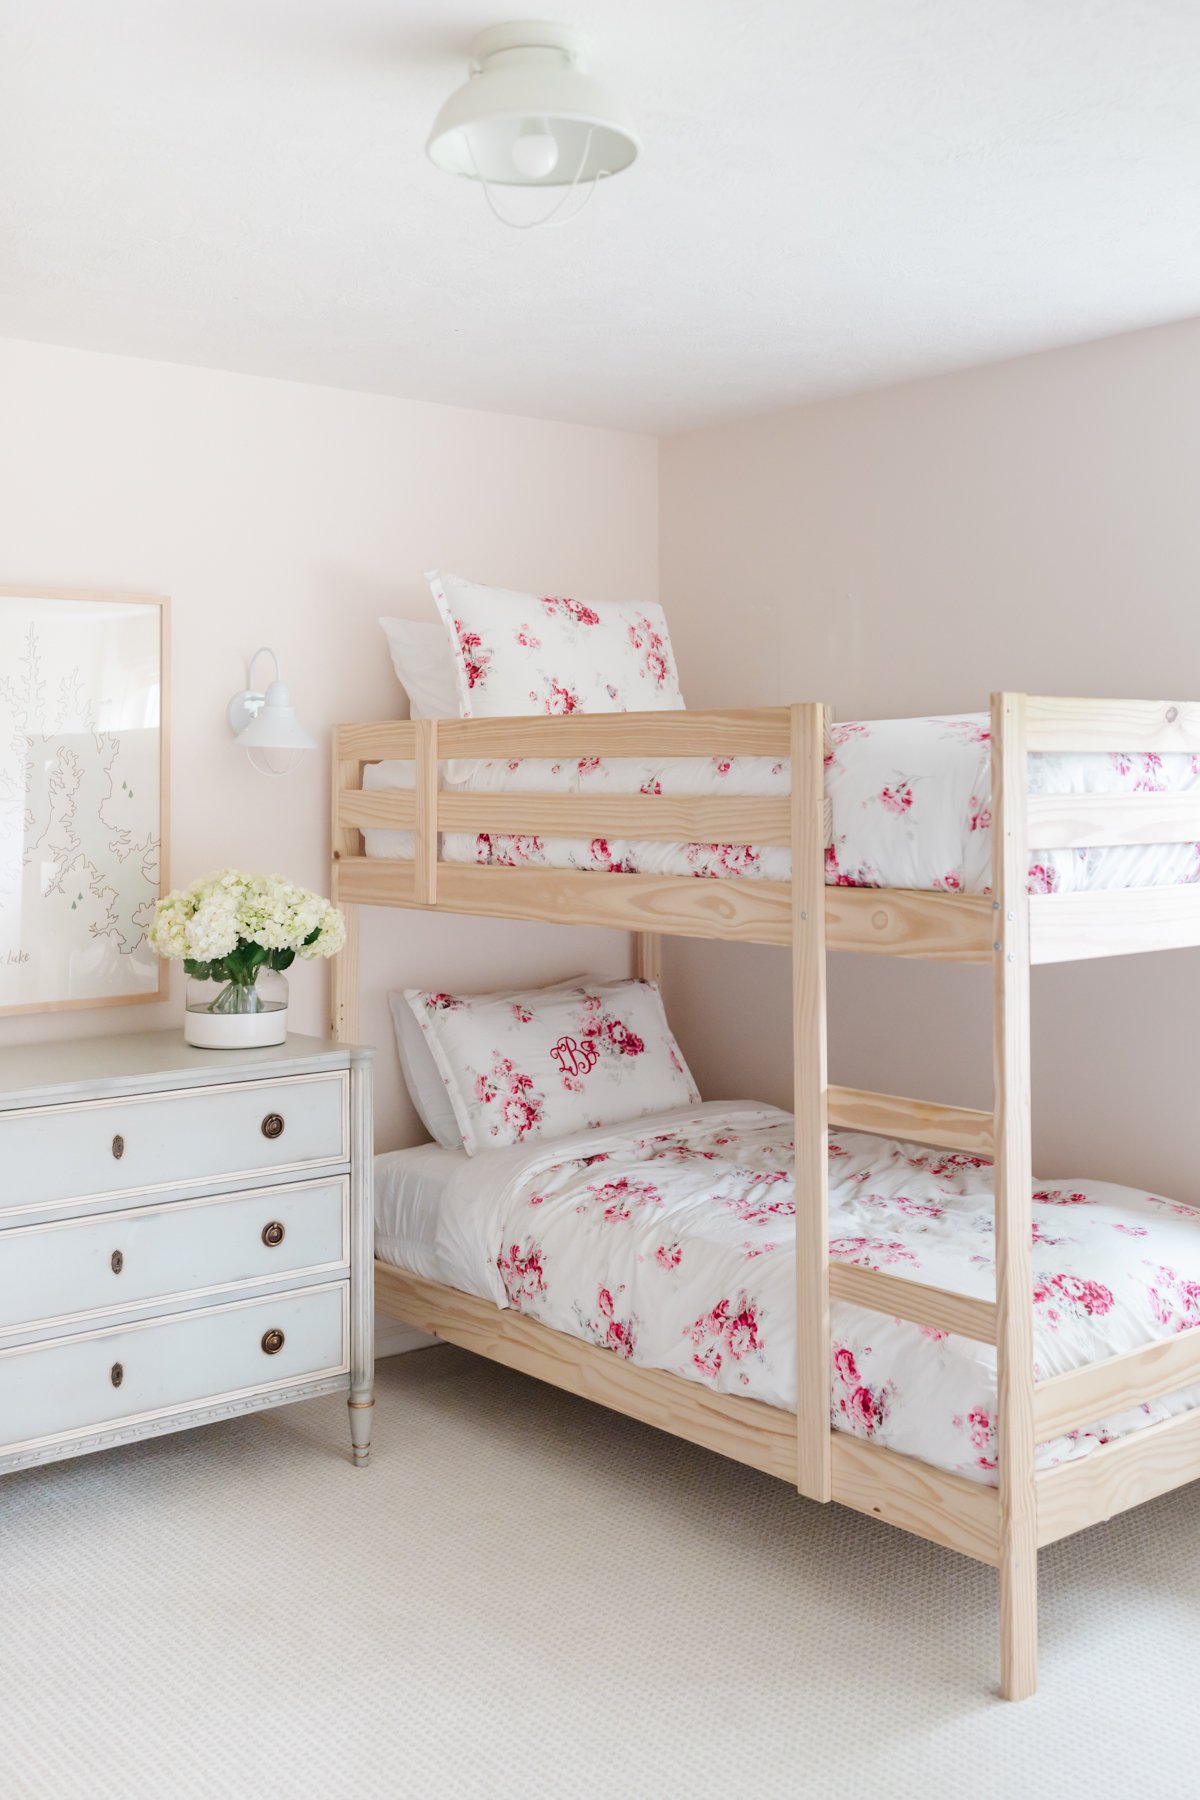 A pale pink girl's bedroom with wooden bunk beds and wall to wall carpet